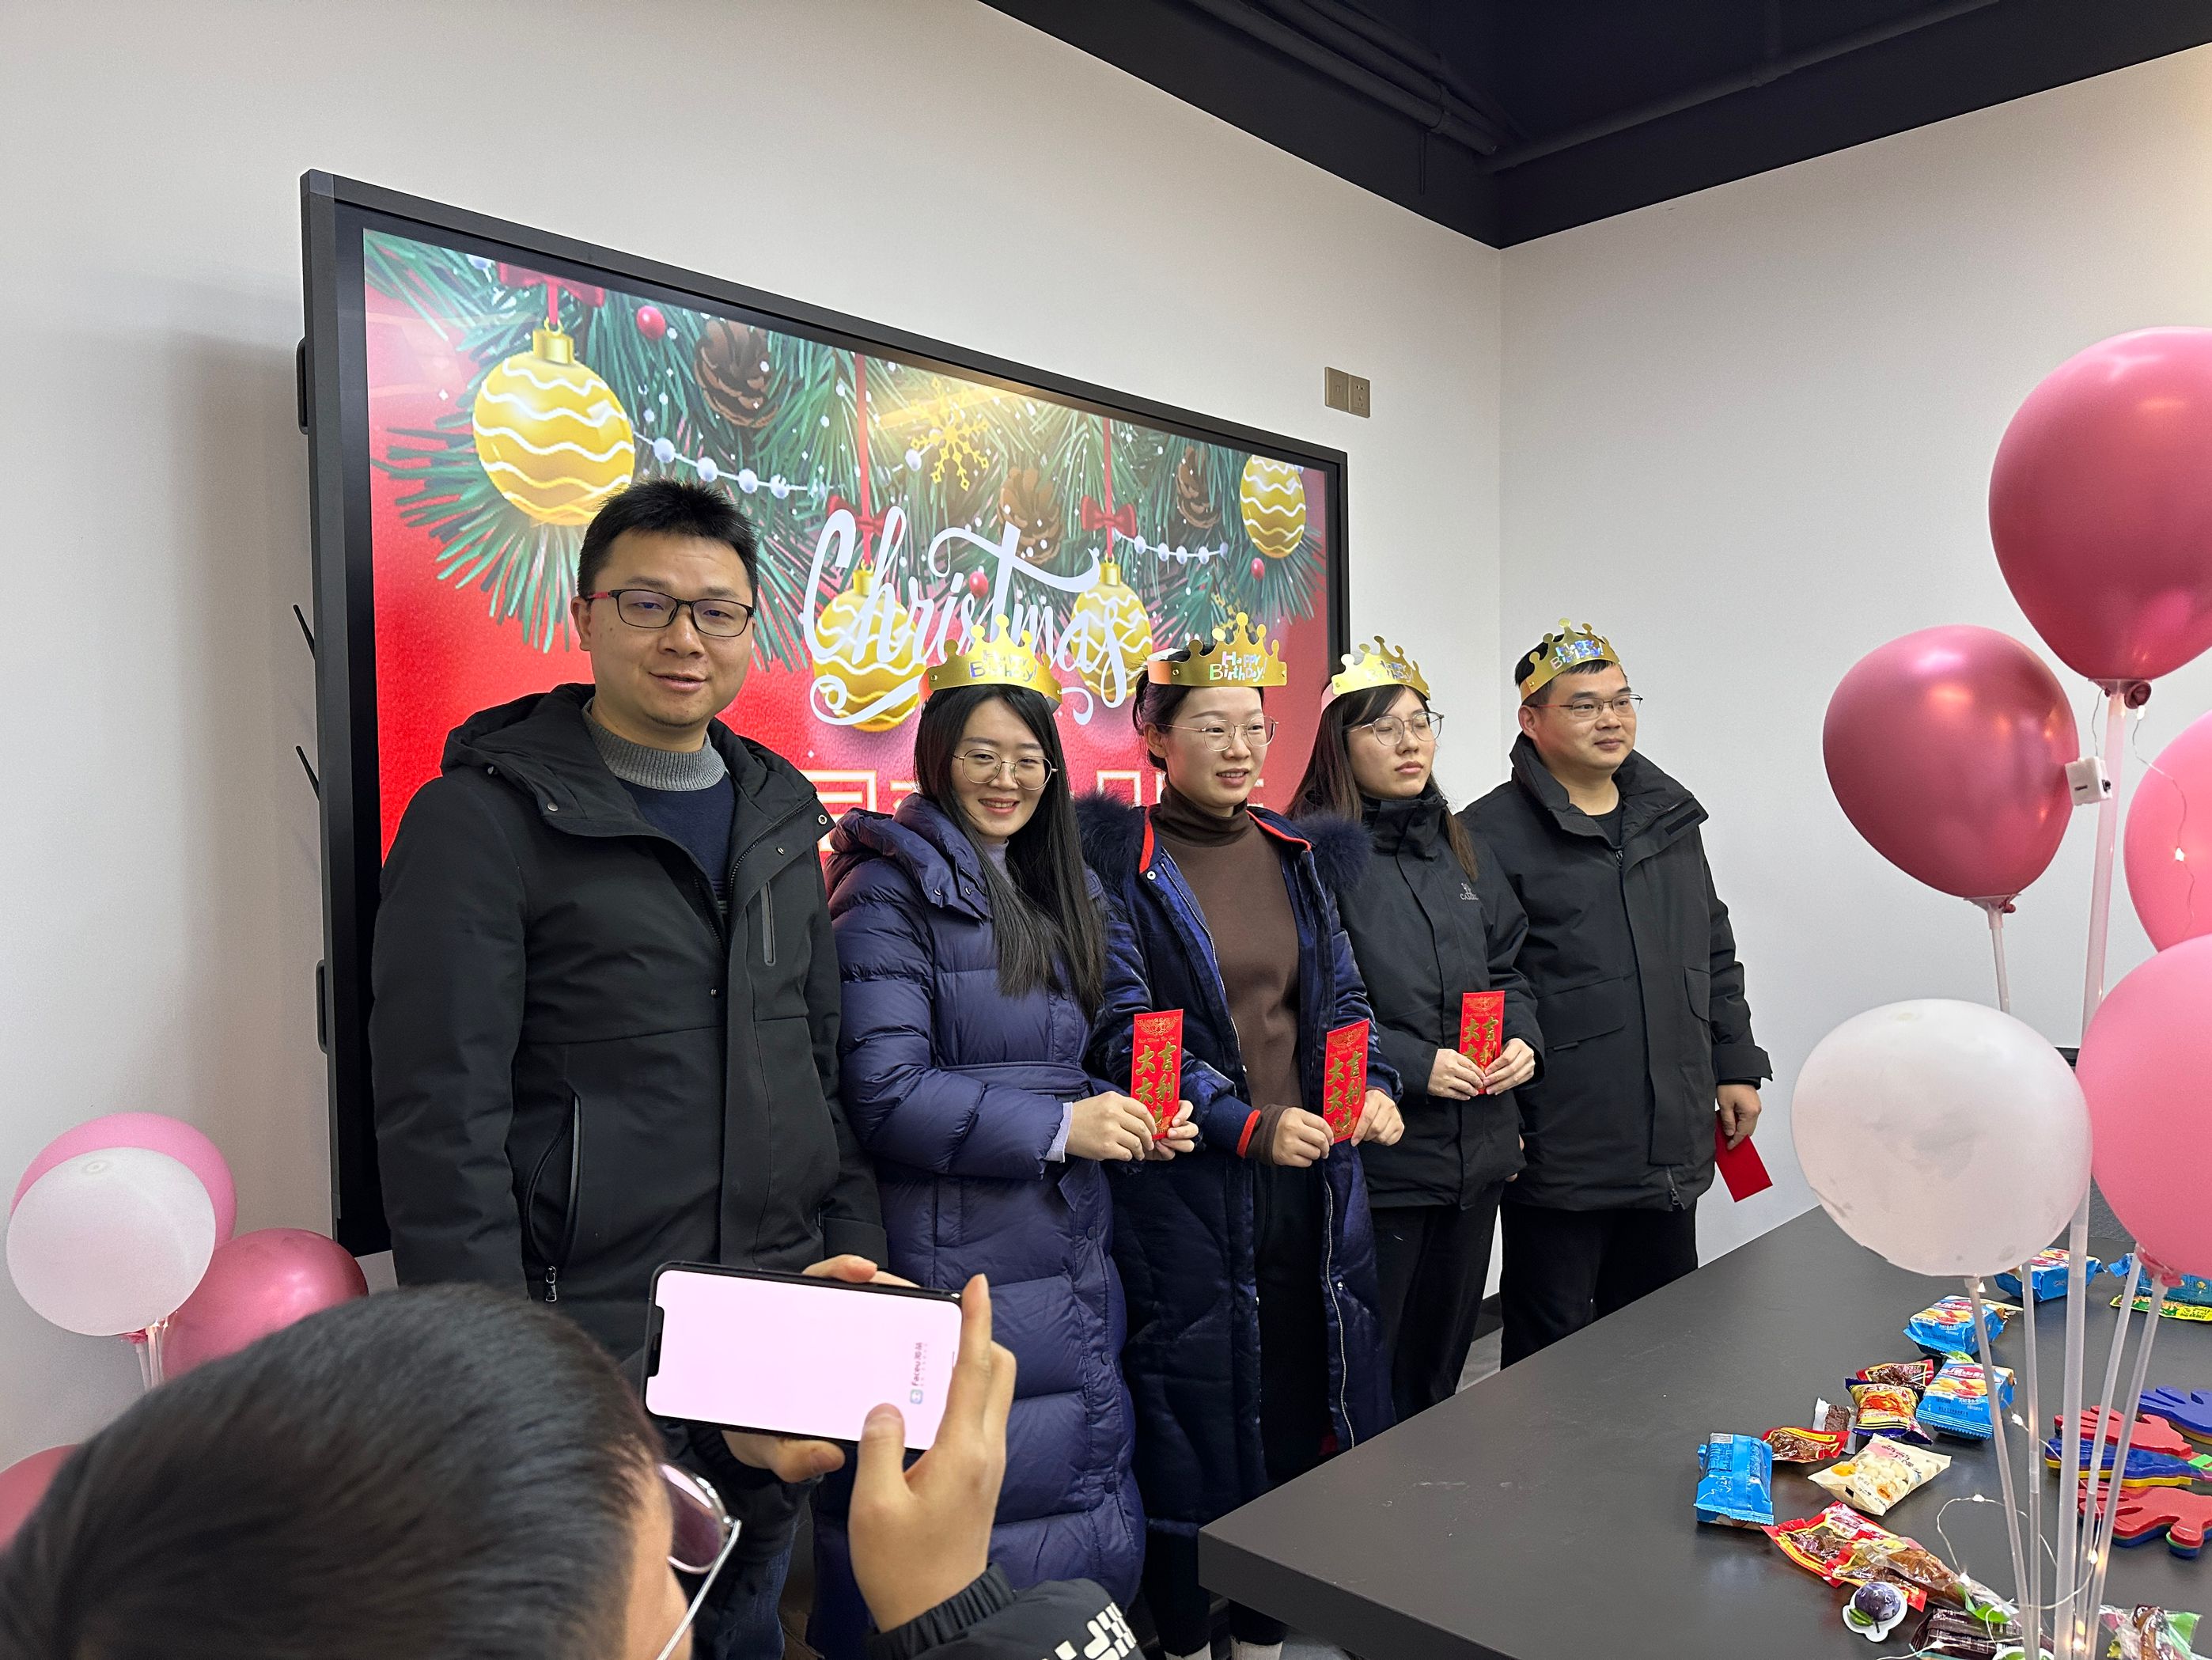 Changsha Hongchong Technology Co., Ltd. Celebrates Christmas and Birthdays with Party